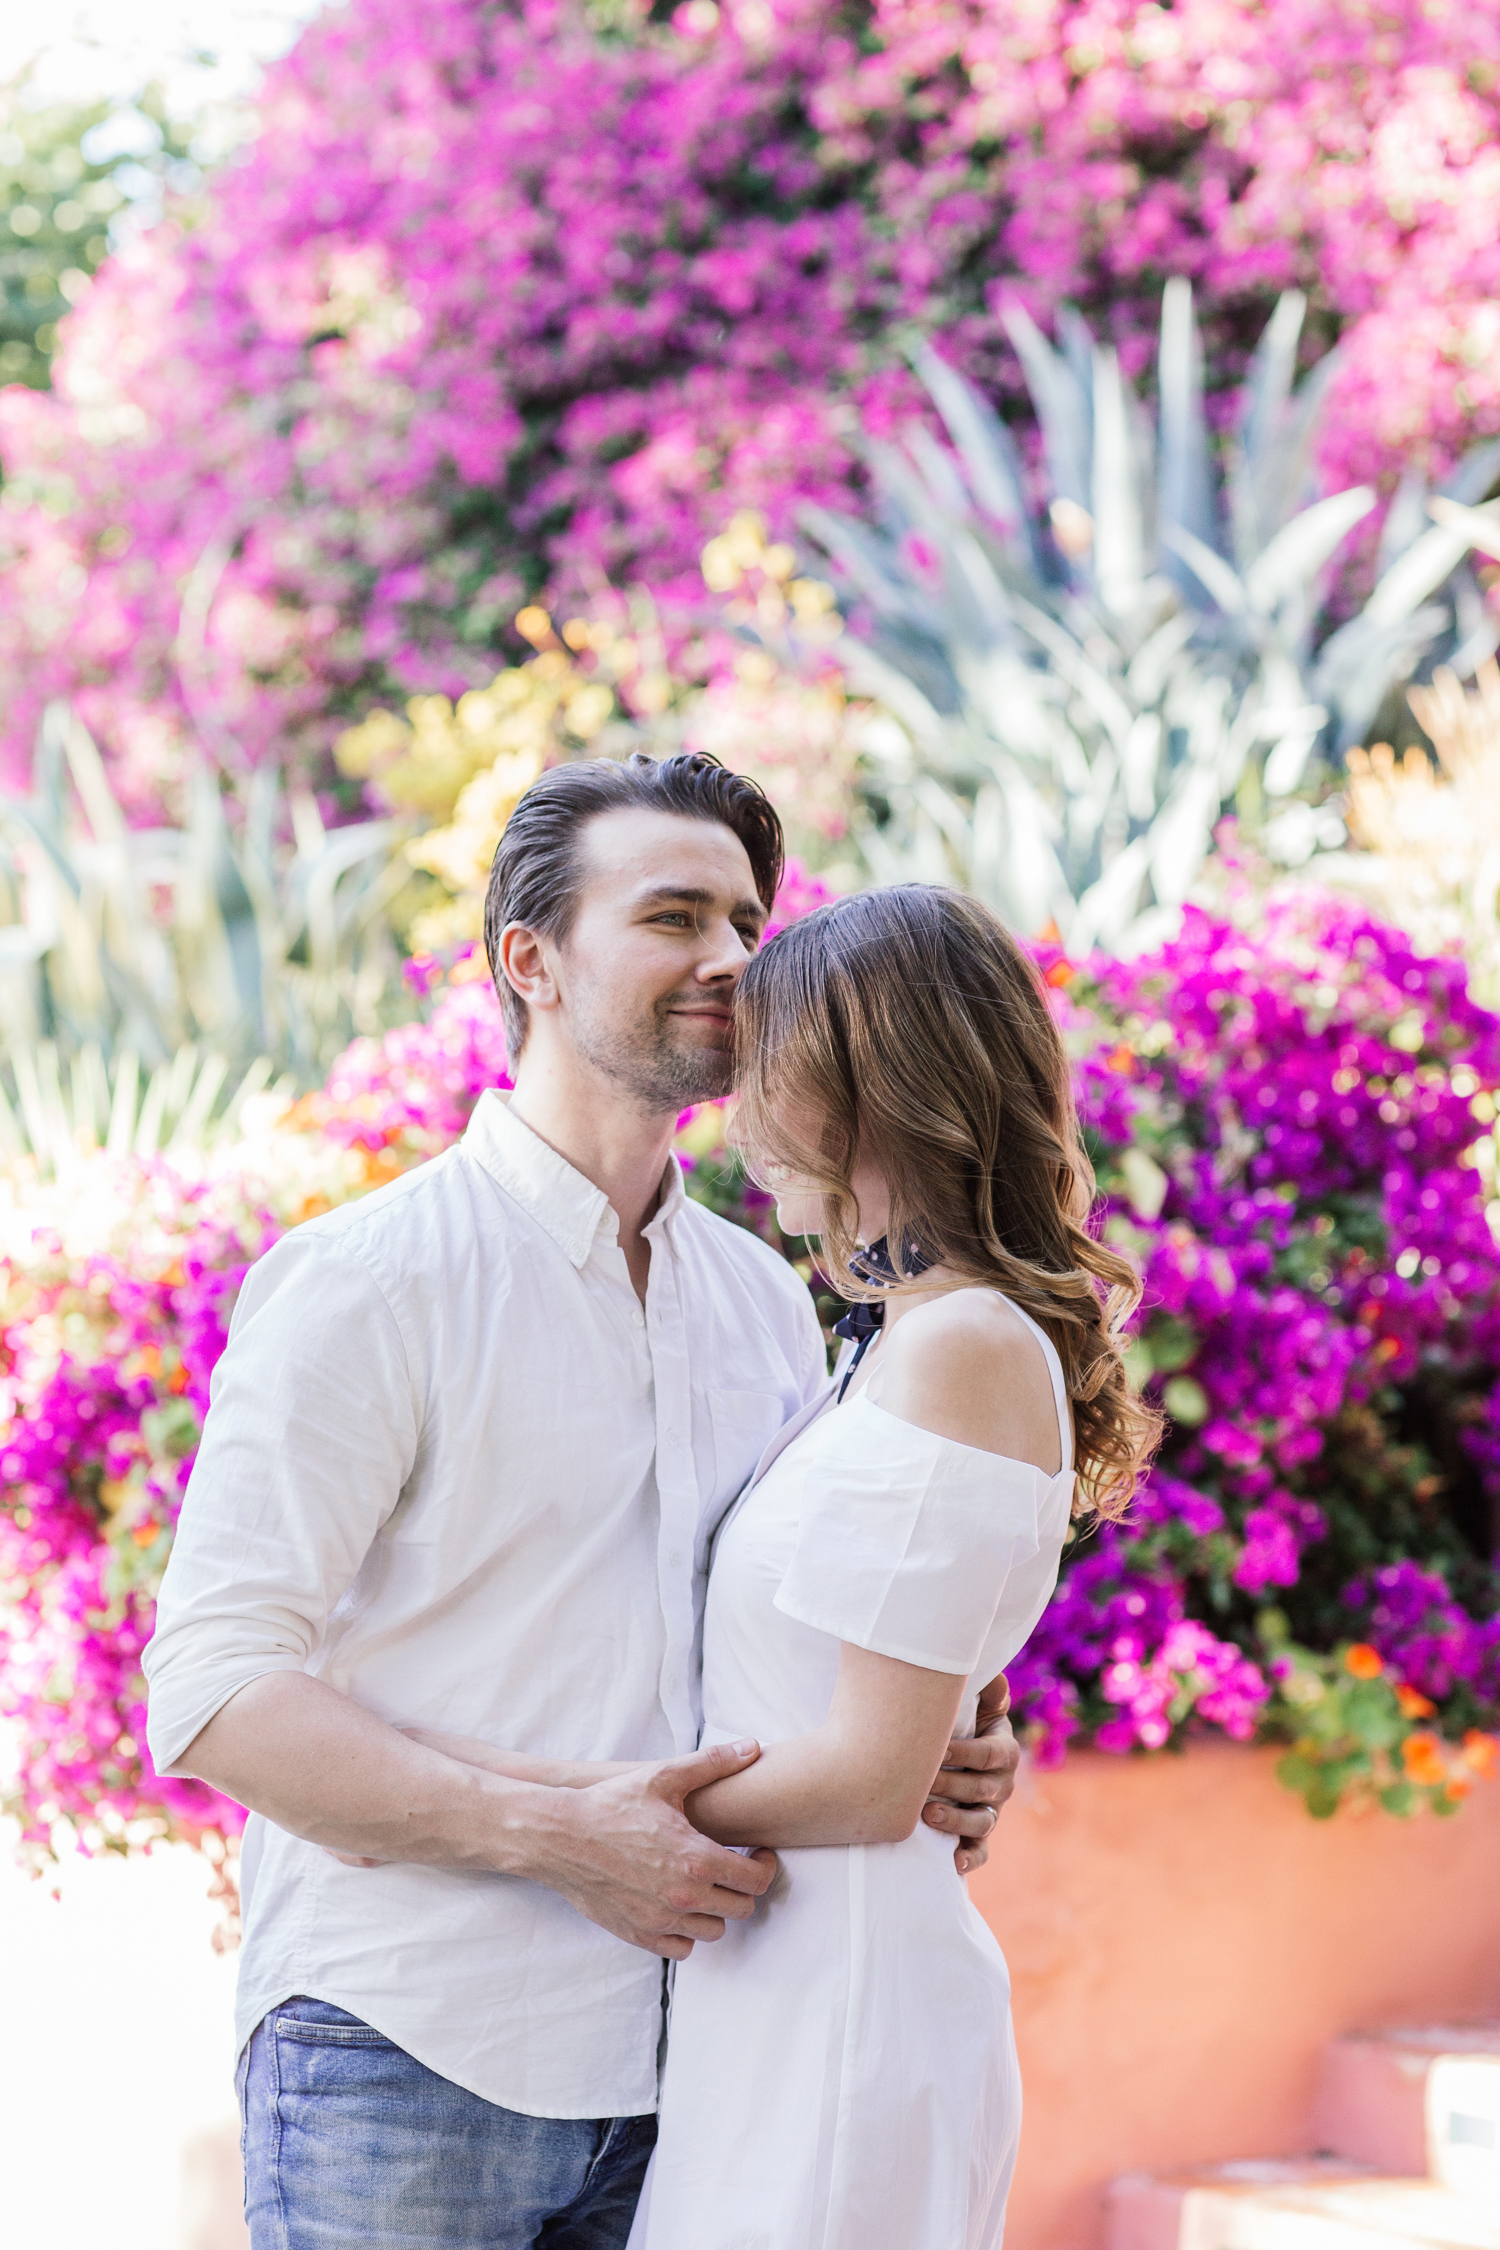 Alyssa Campanella Torrance Coombs Still Star Crossed 5 Facts Being An Actor's Wife